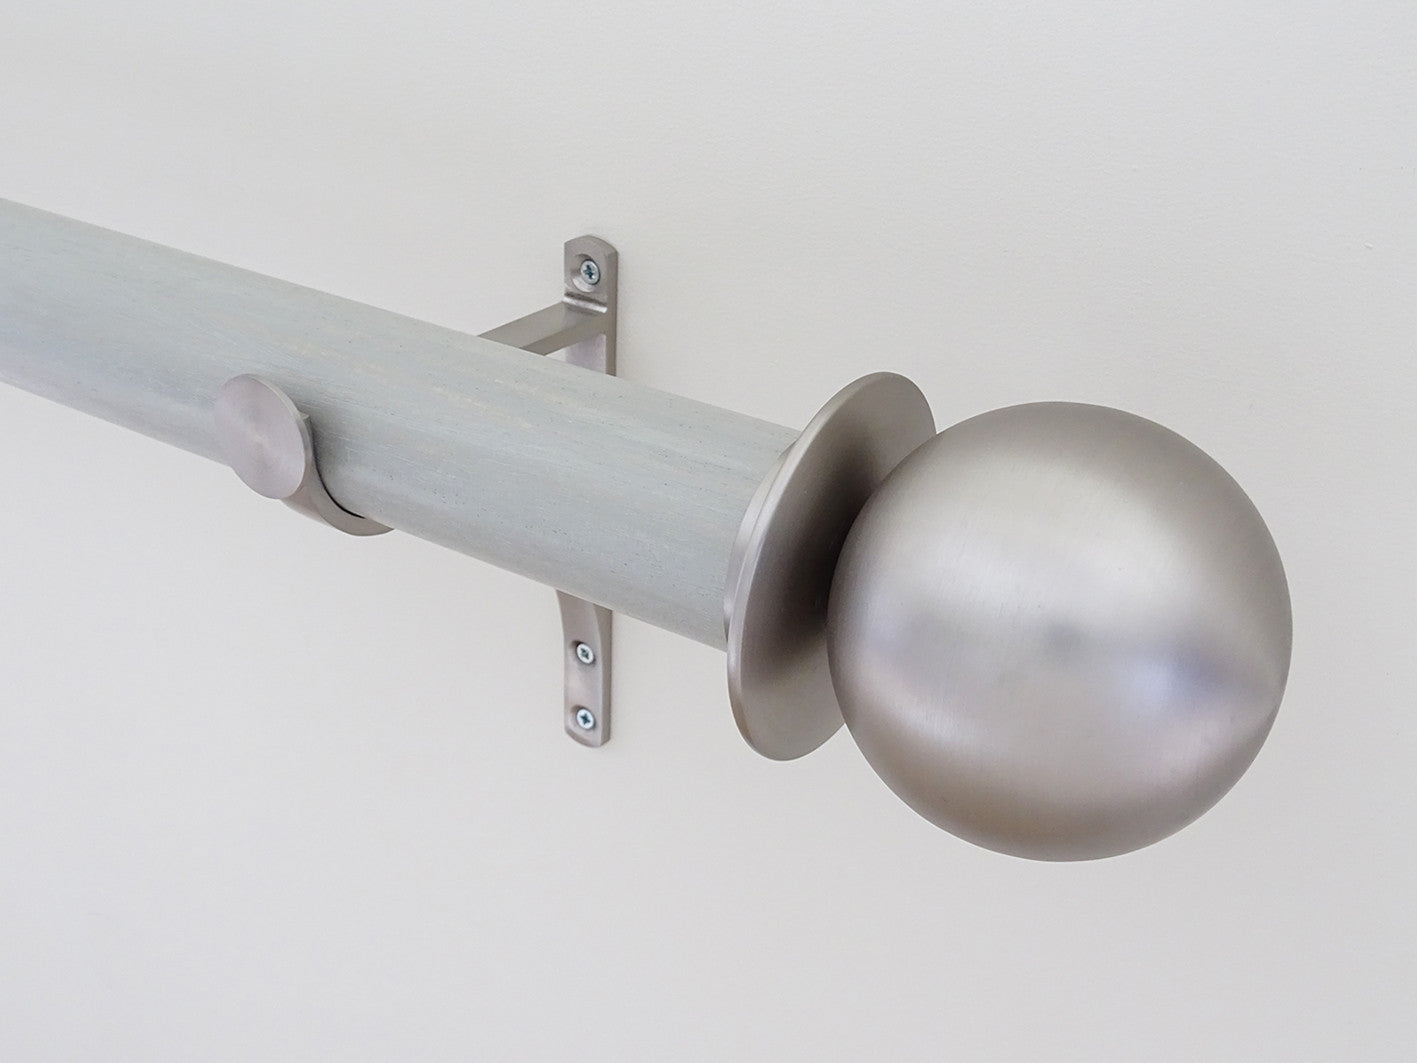 Metal ball finial in brushed steel, mounted on 50mm "wood pidgeon" stained wood pole set